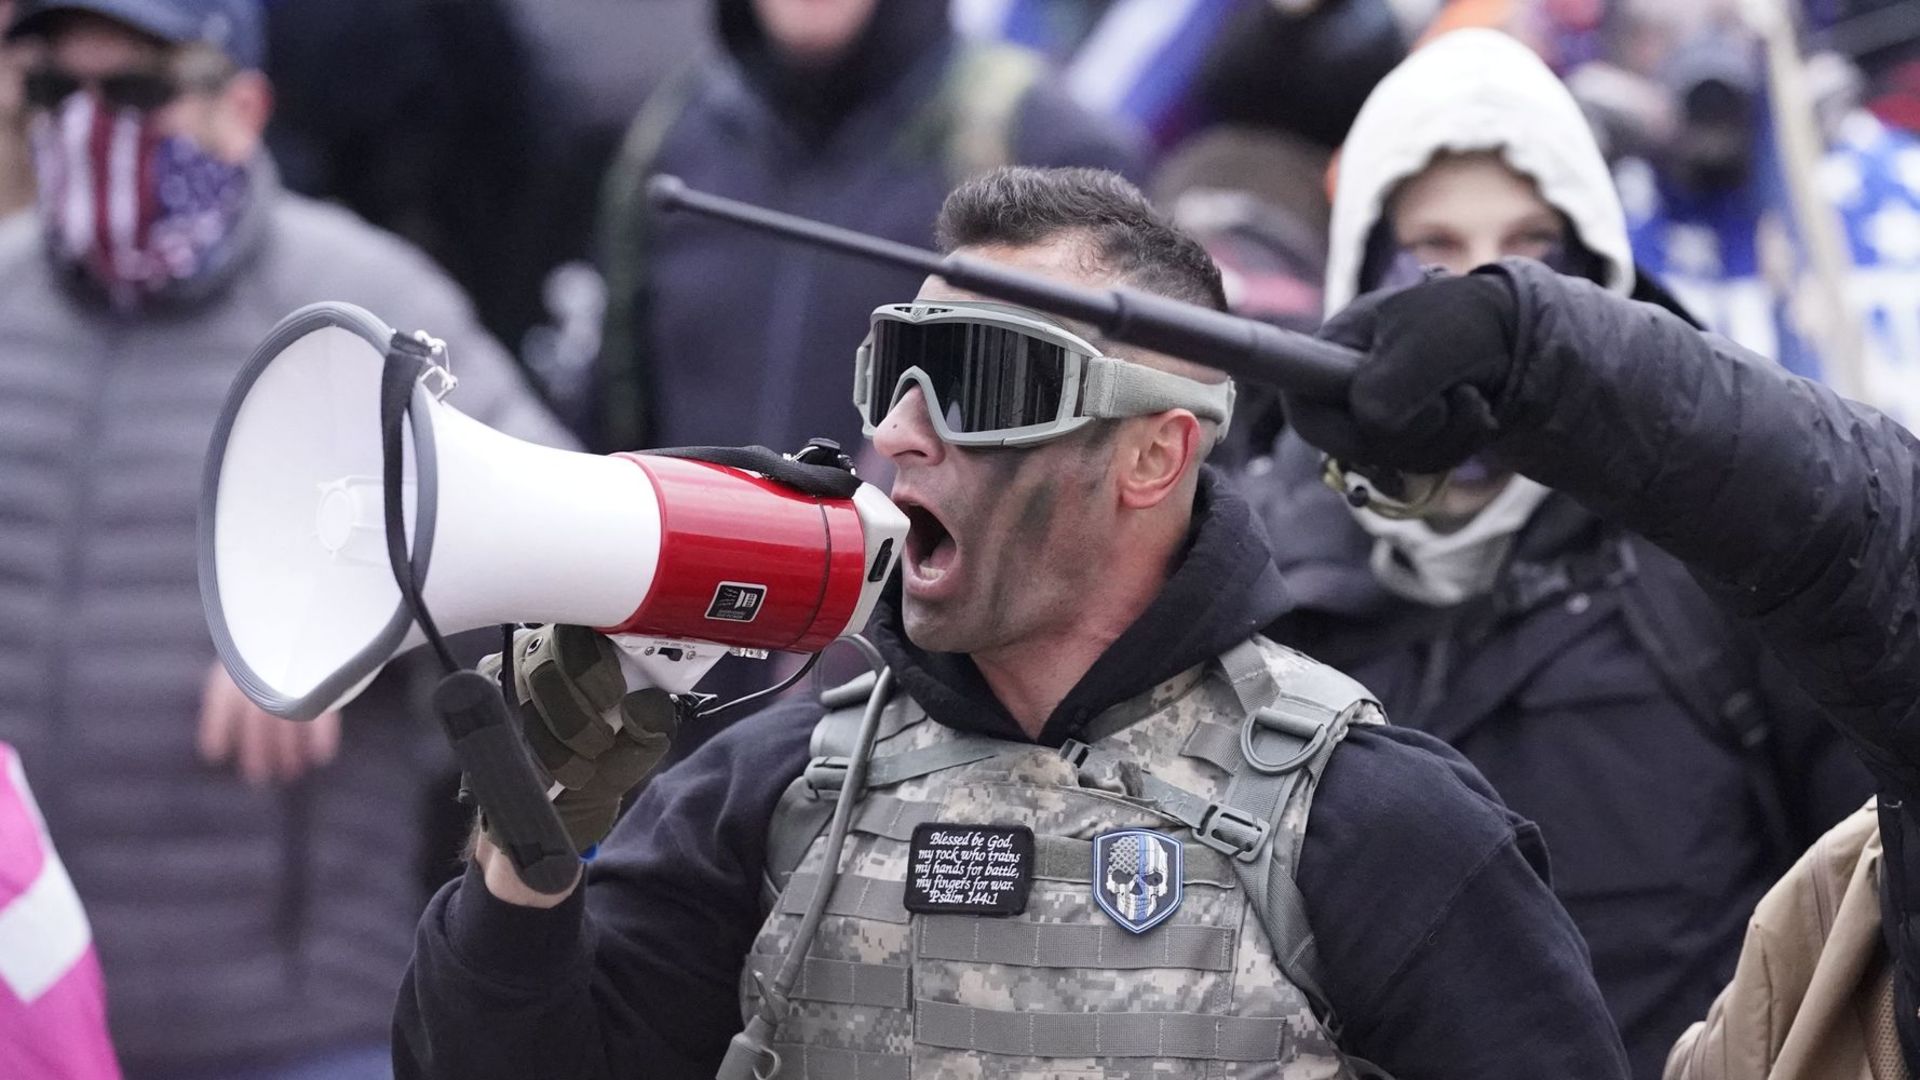 Samuel Lazar, No. 275 on the FBI Capitol Suspect list, appears here dressed in a camouflage flak jacket and black face paint and yelling into a bullhorn at the U.S. Capitol on Jan. 6, 2021. Online sleuths used his unique outfit to identify him in multiple videos where he appears to commit violent acts.